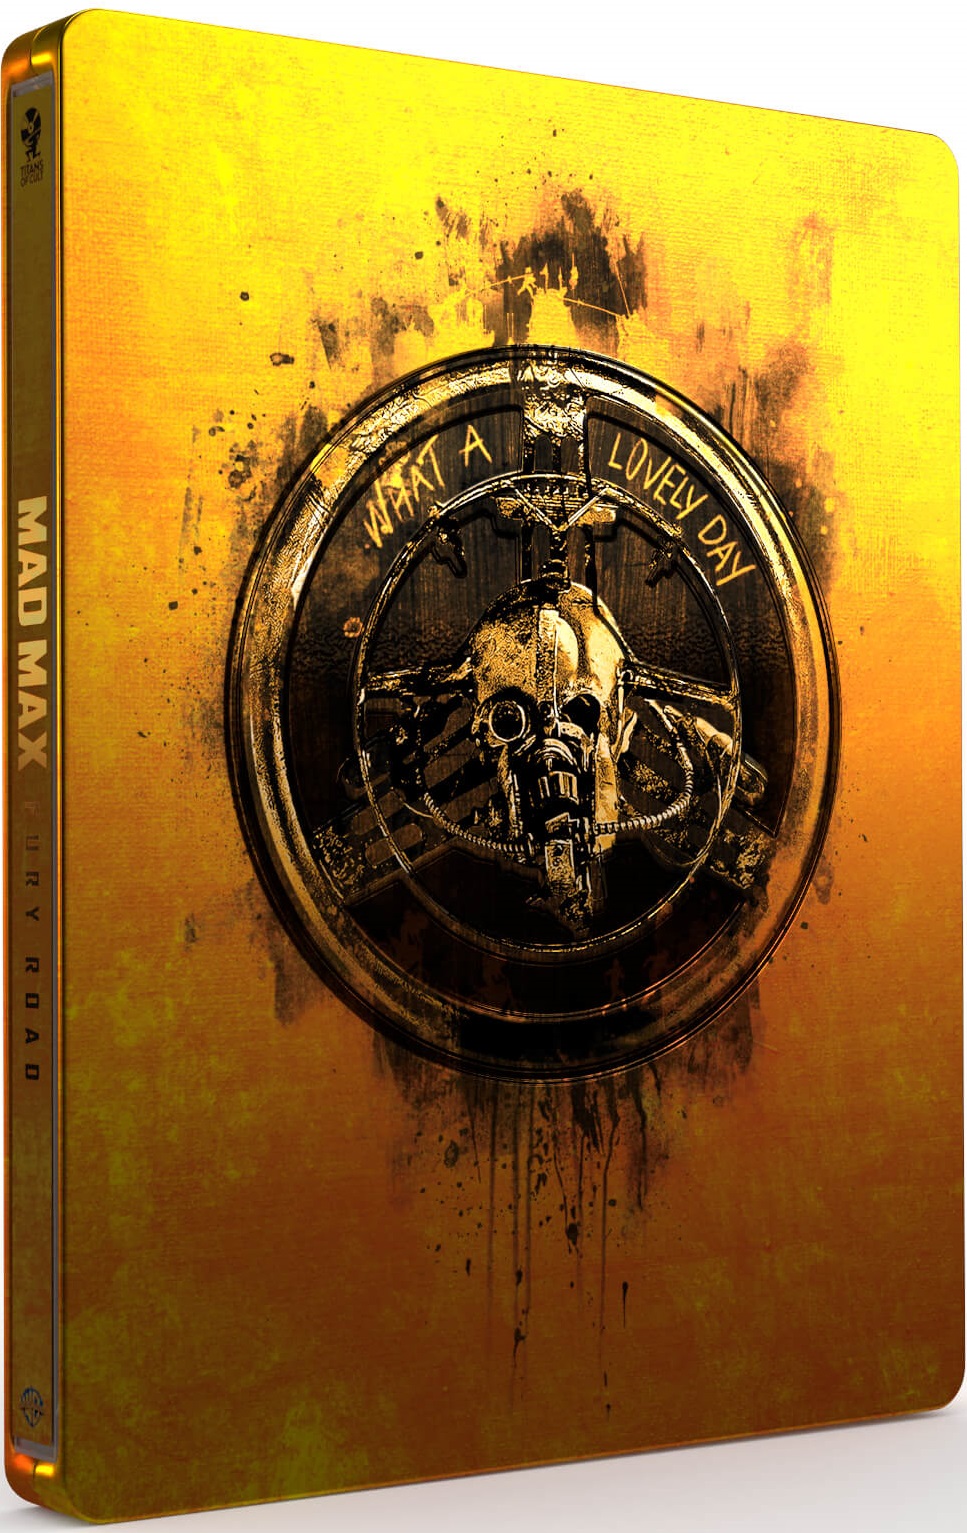 Next up from Titans of Cult is a stunning new Mad Max: Fury Road 4K  Steelbook in June - Steelbook Blu-ray News